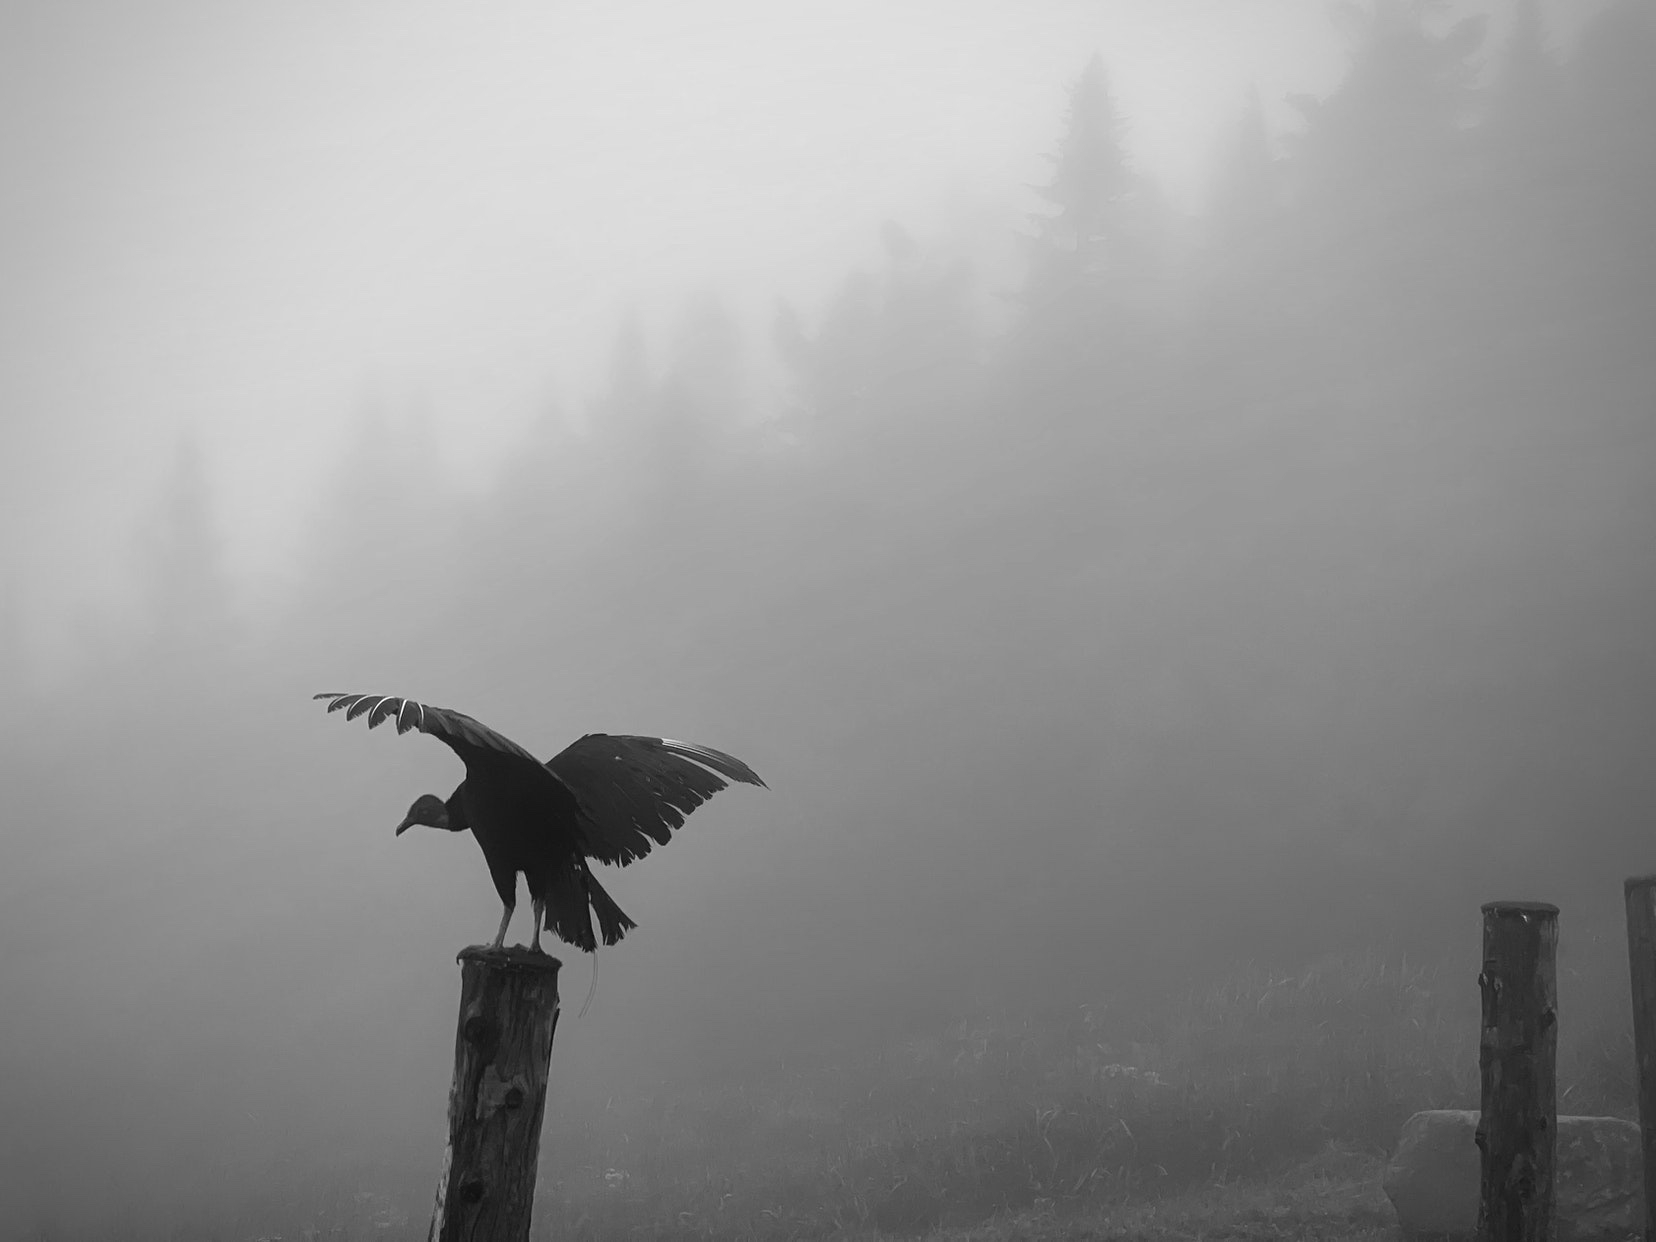 Bird with wings spread open on a foggy day.